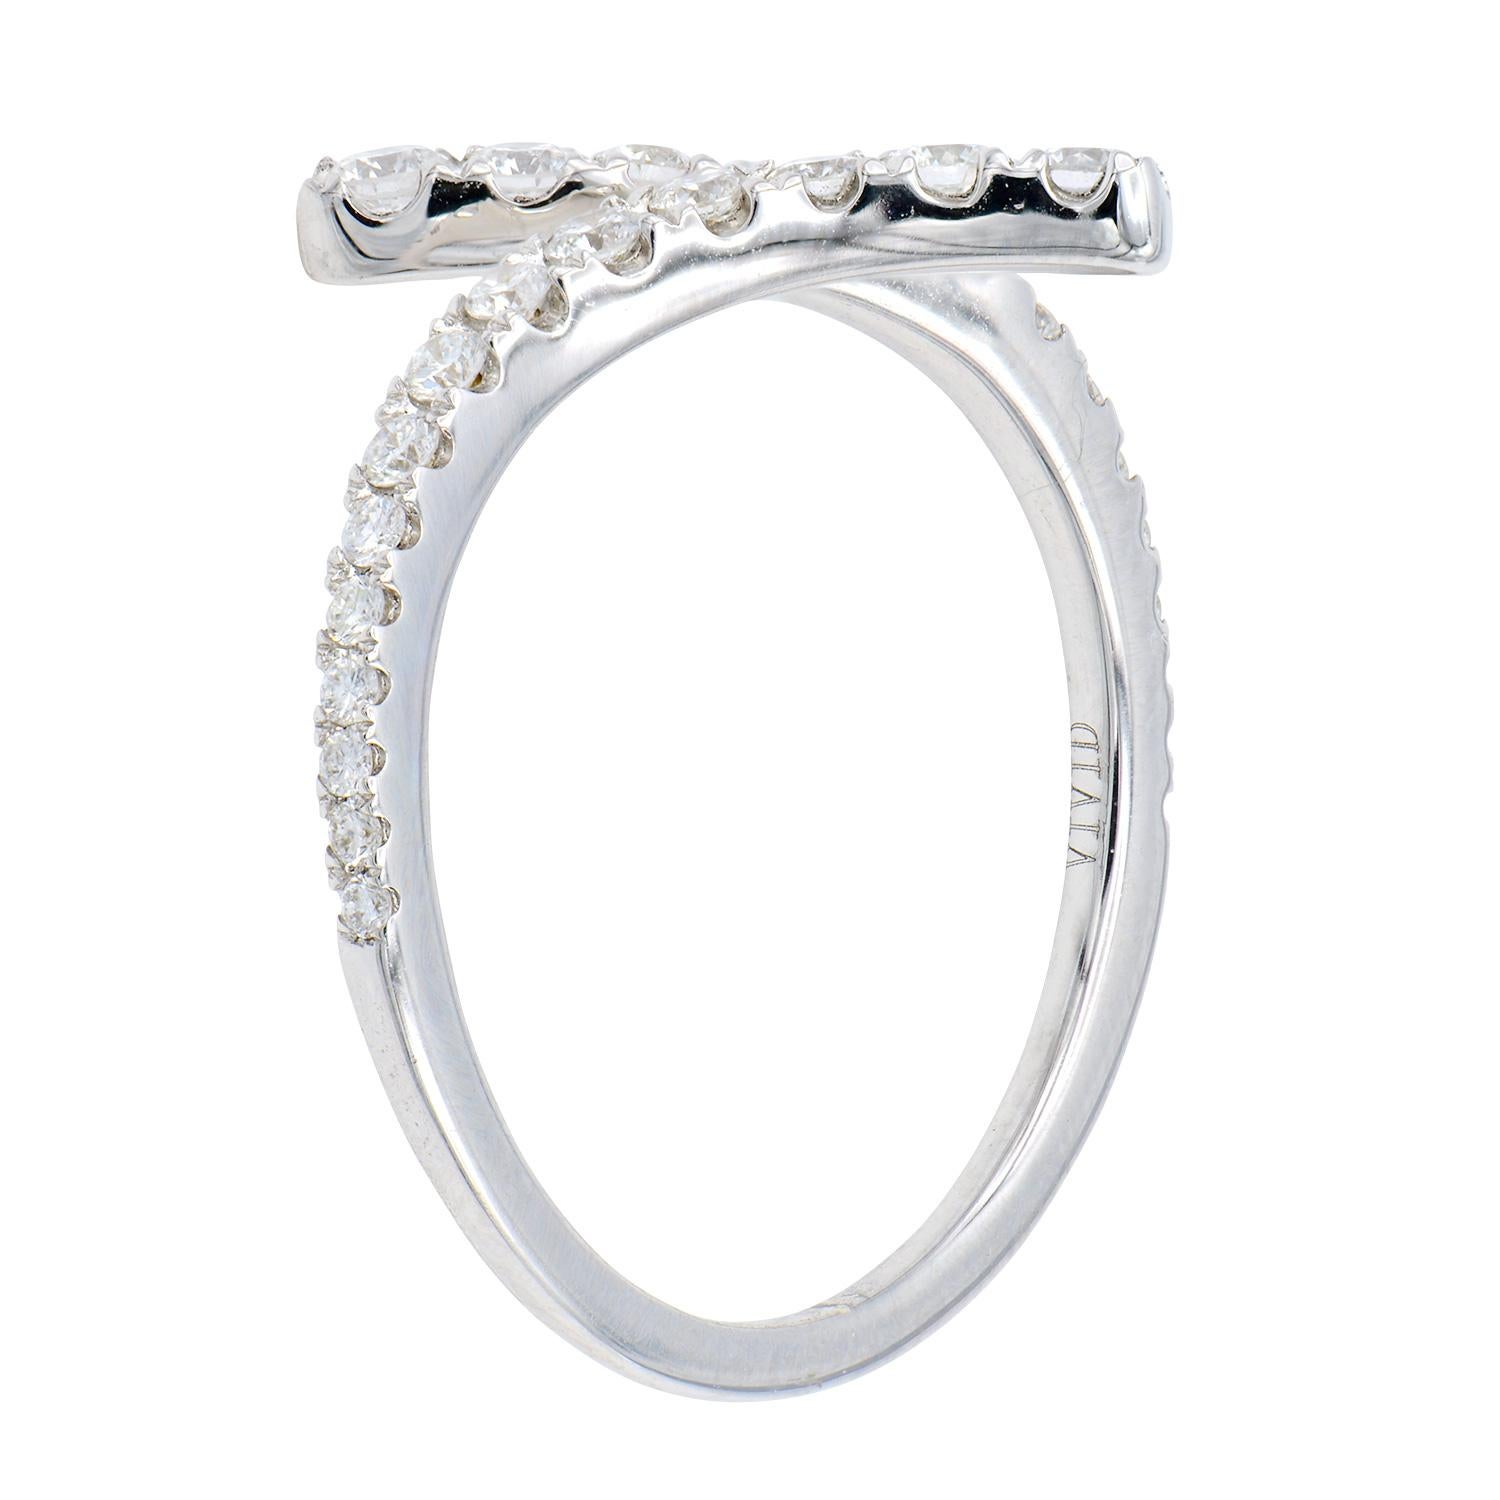 This modern fun ring is made from 28 round VS2, G color diamonds that go halfway around the ring totaling 0.45 carats. The diamonds are set in 2.4 grams of 18 karat white gold. This ring is size 6.5.